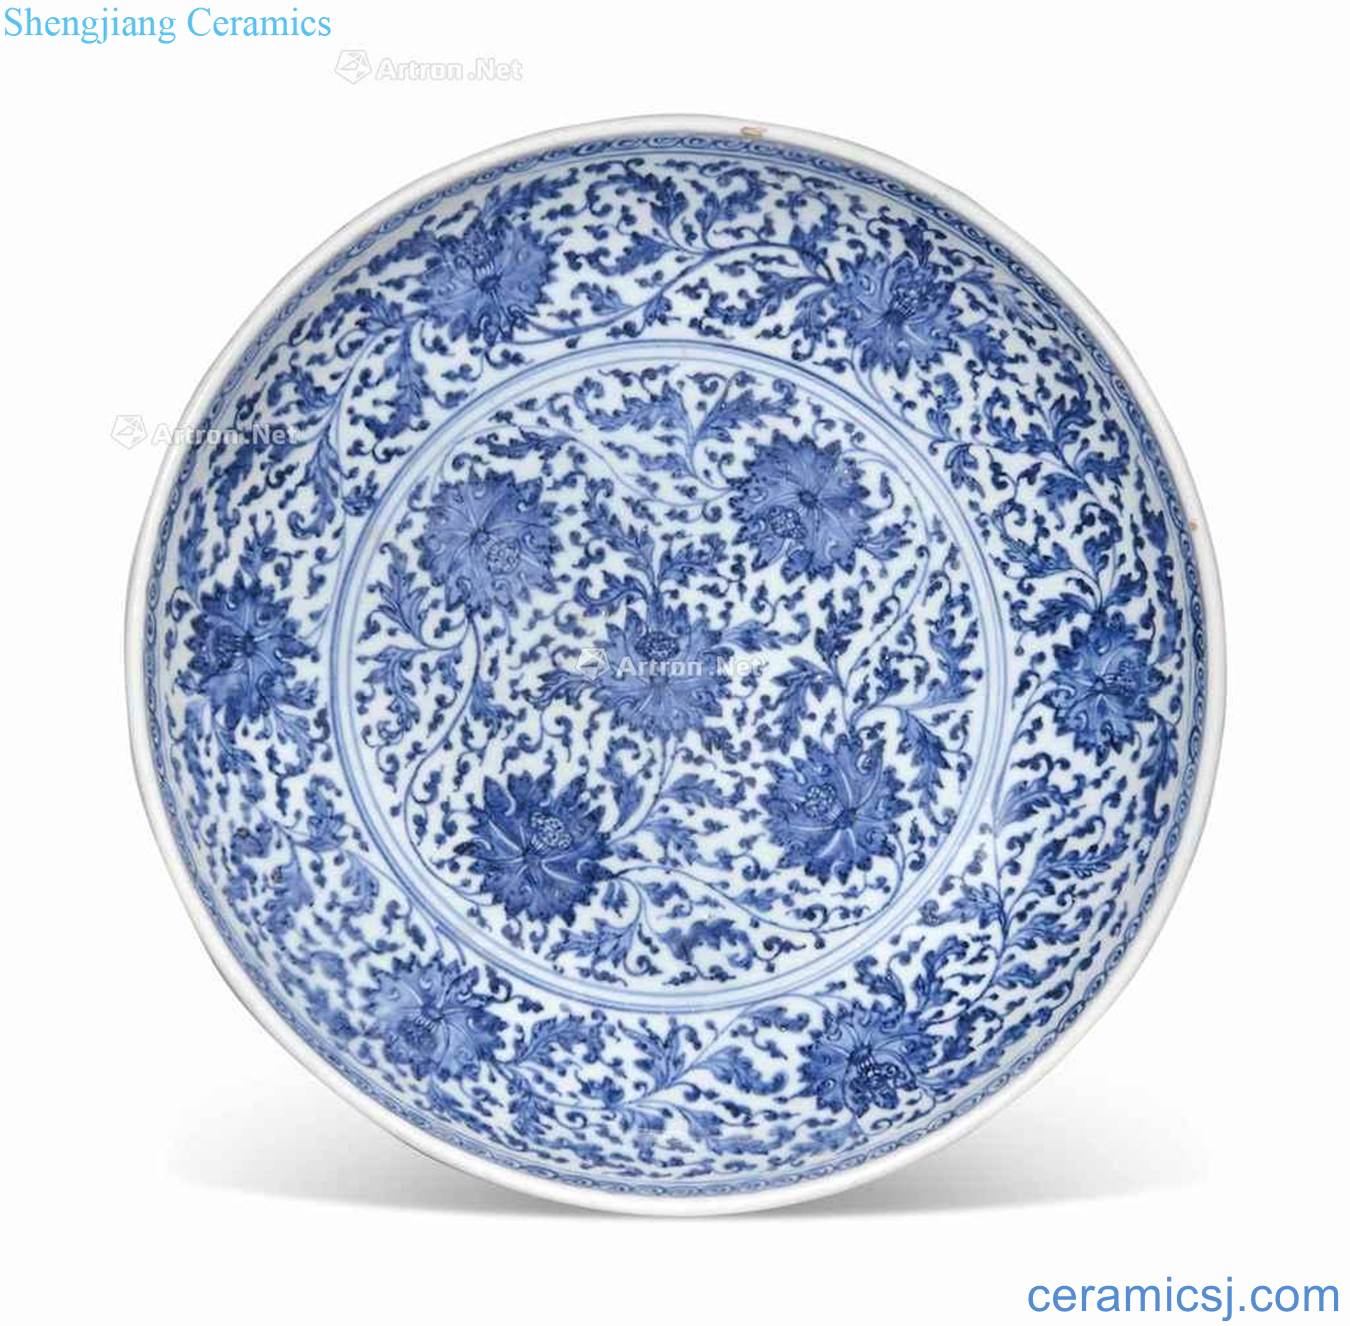 In the 18th century qing Blue and white lotus flower tray